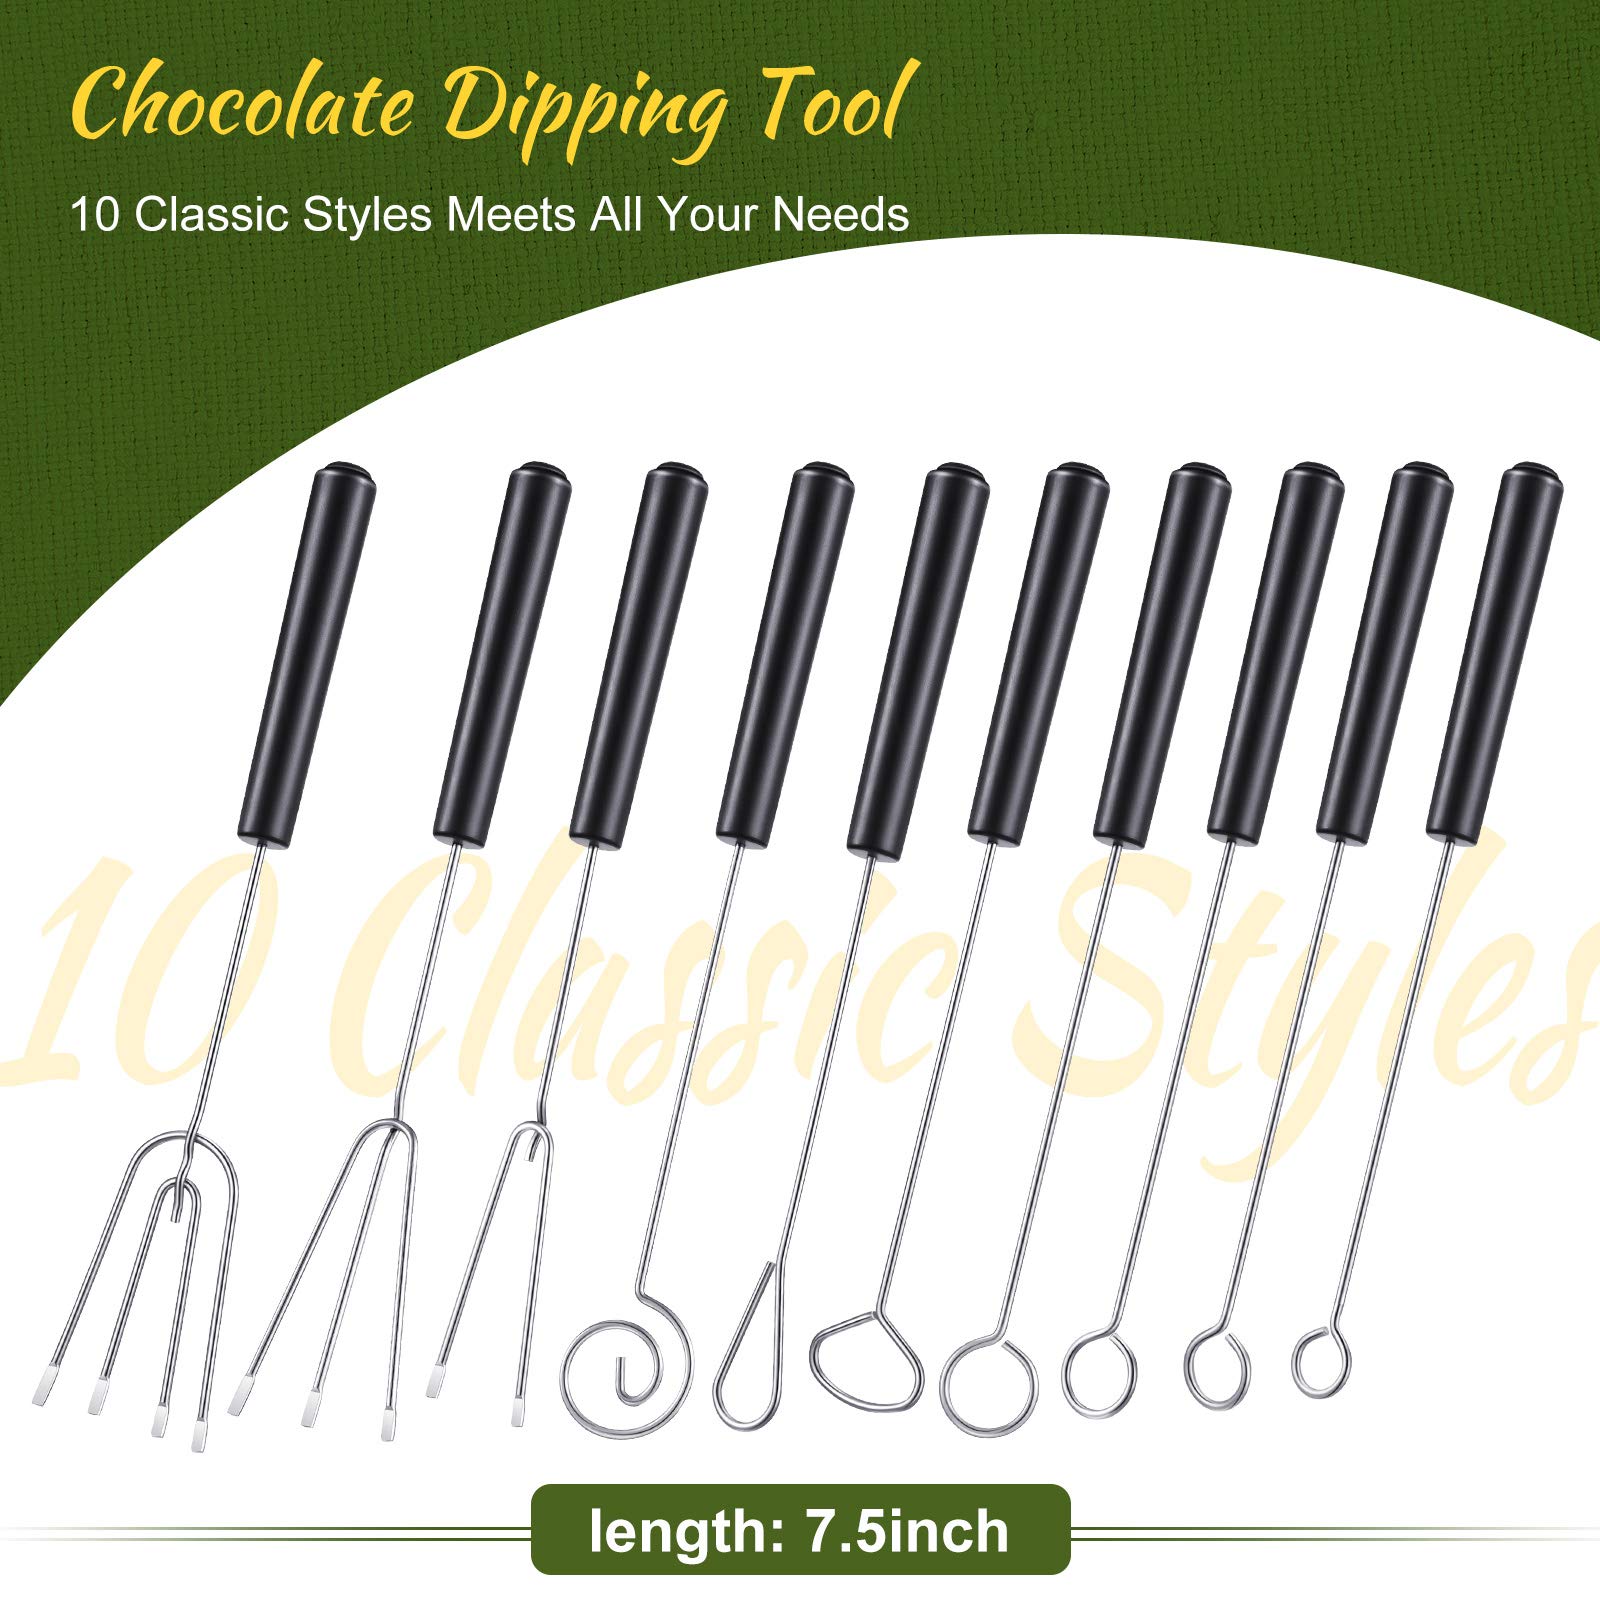 Patelai 12 Pcs Candy Dipping Tools Set Included 10 Pcs Chocolate Dipping Fork Spoons and 2 Pcs Stainless Steel Culinary Decorating Spoons Chef Art Pencil for Decorative Plates